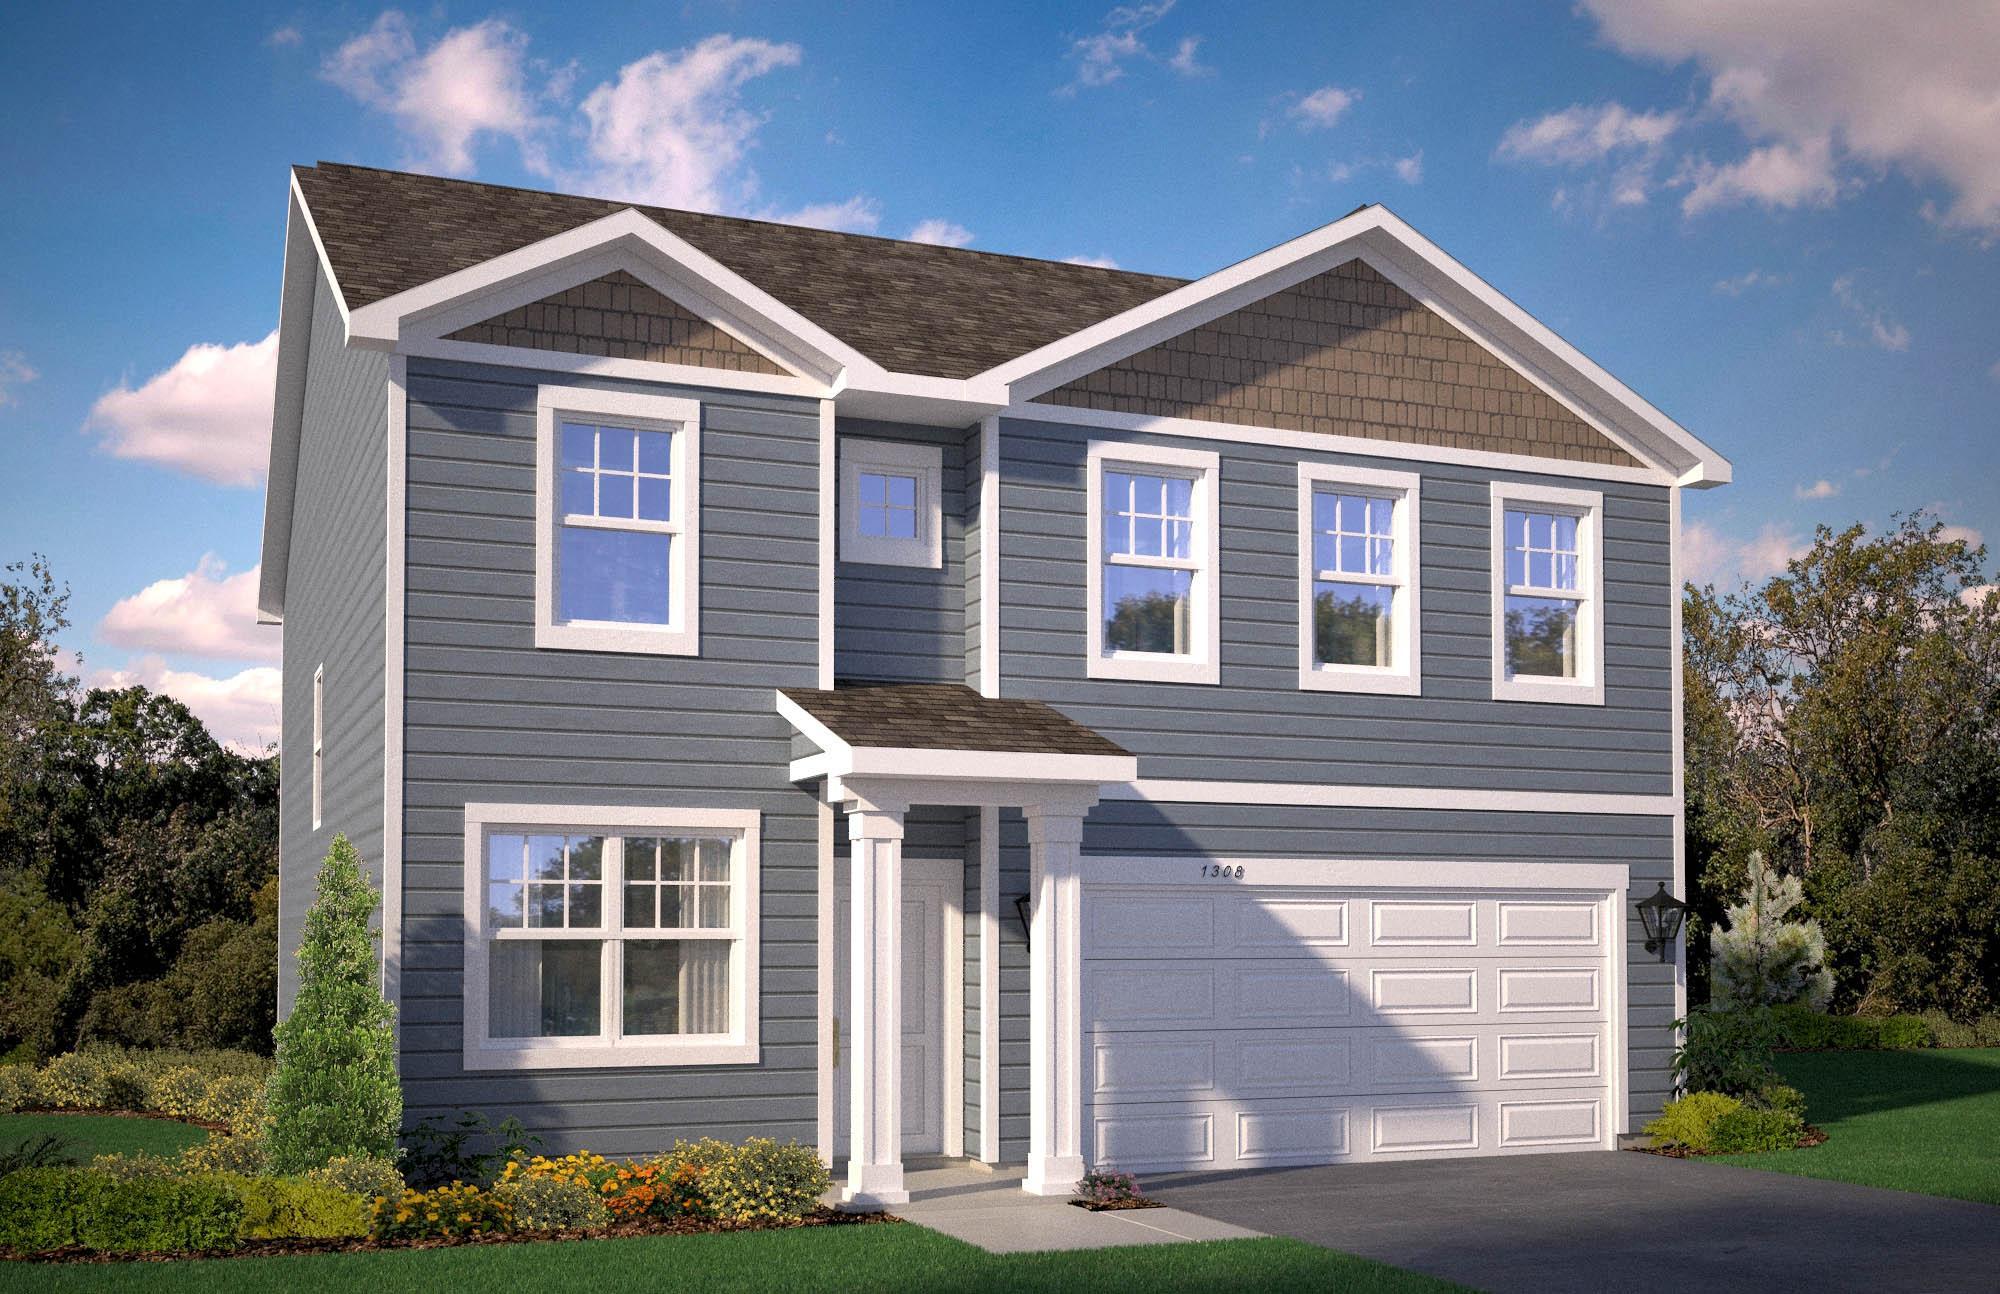 Rendering of the Holcombe's elevation and architecture. NOT the color of the home being built and please note the home being built WILL have stone accents on the front of the home.